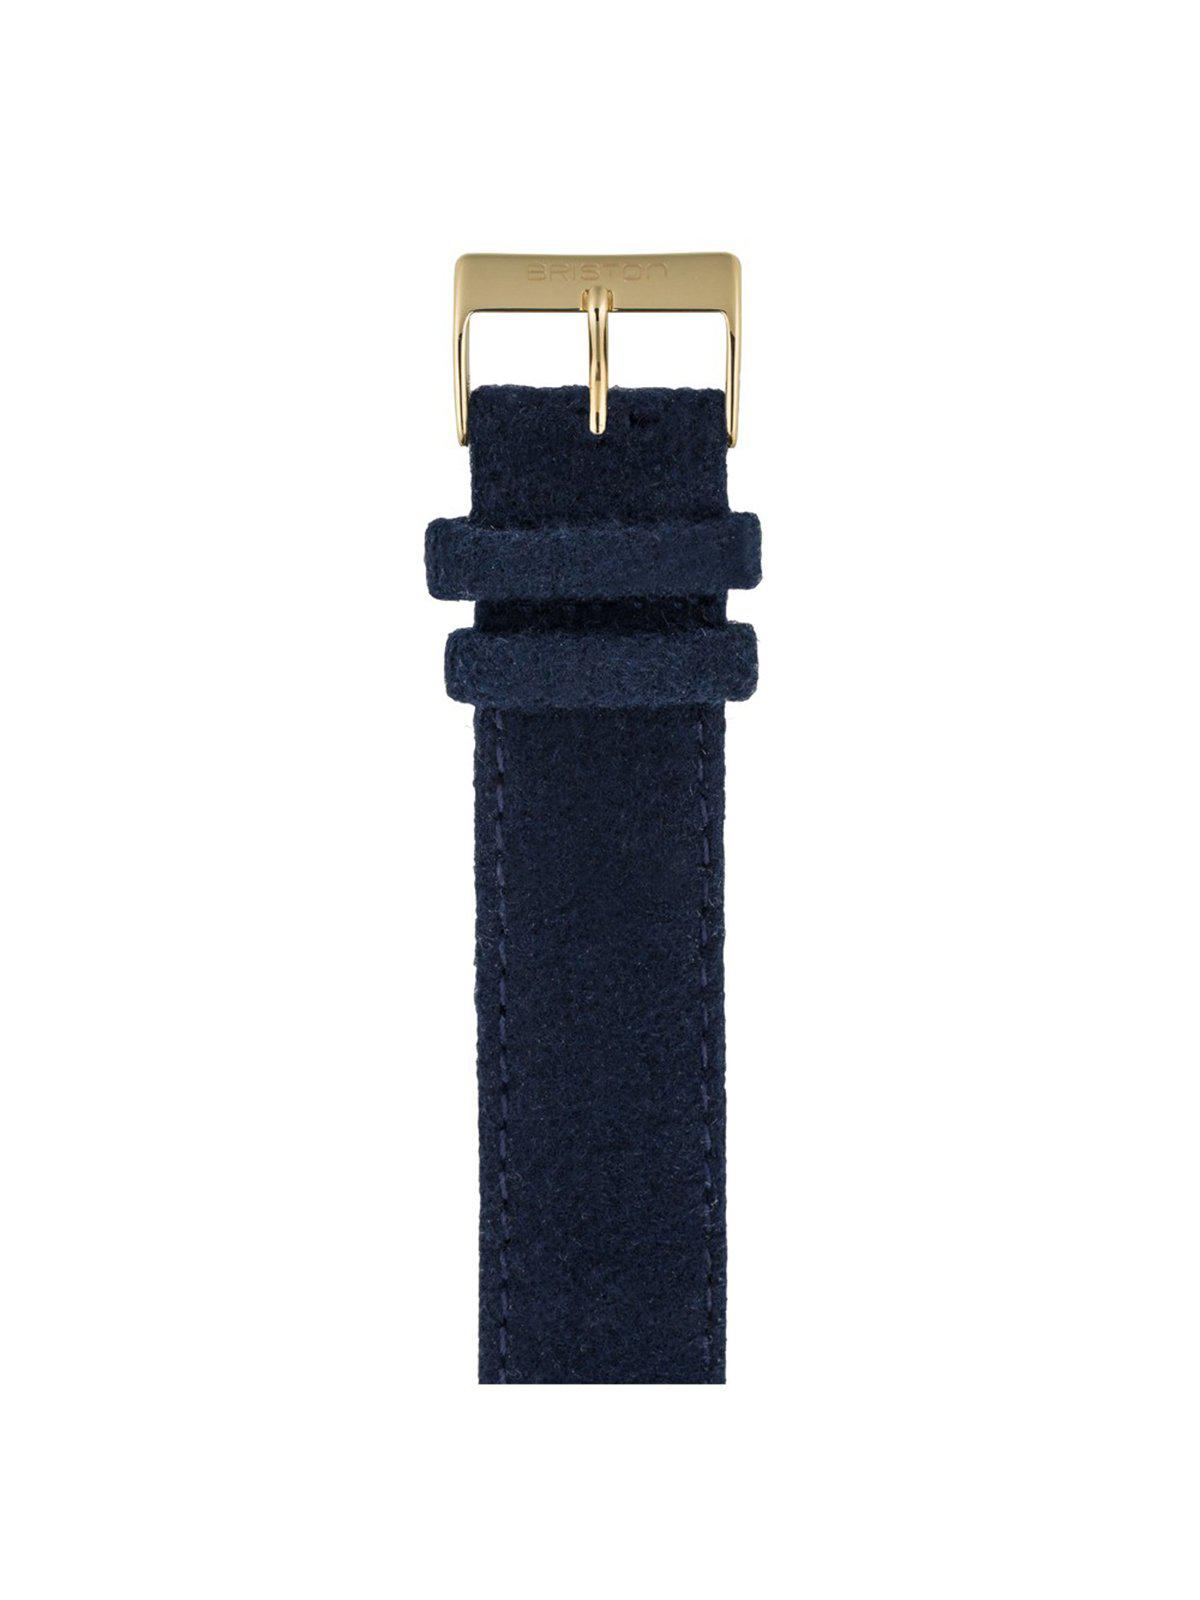 Briston Leather Flannel Strap Navy Blue Yellow Gold 20mm - MORE by Morello Indonesia